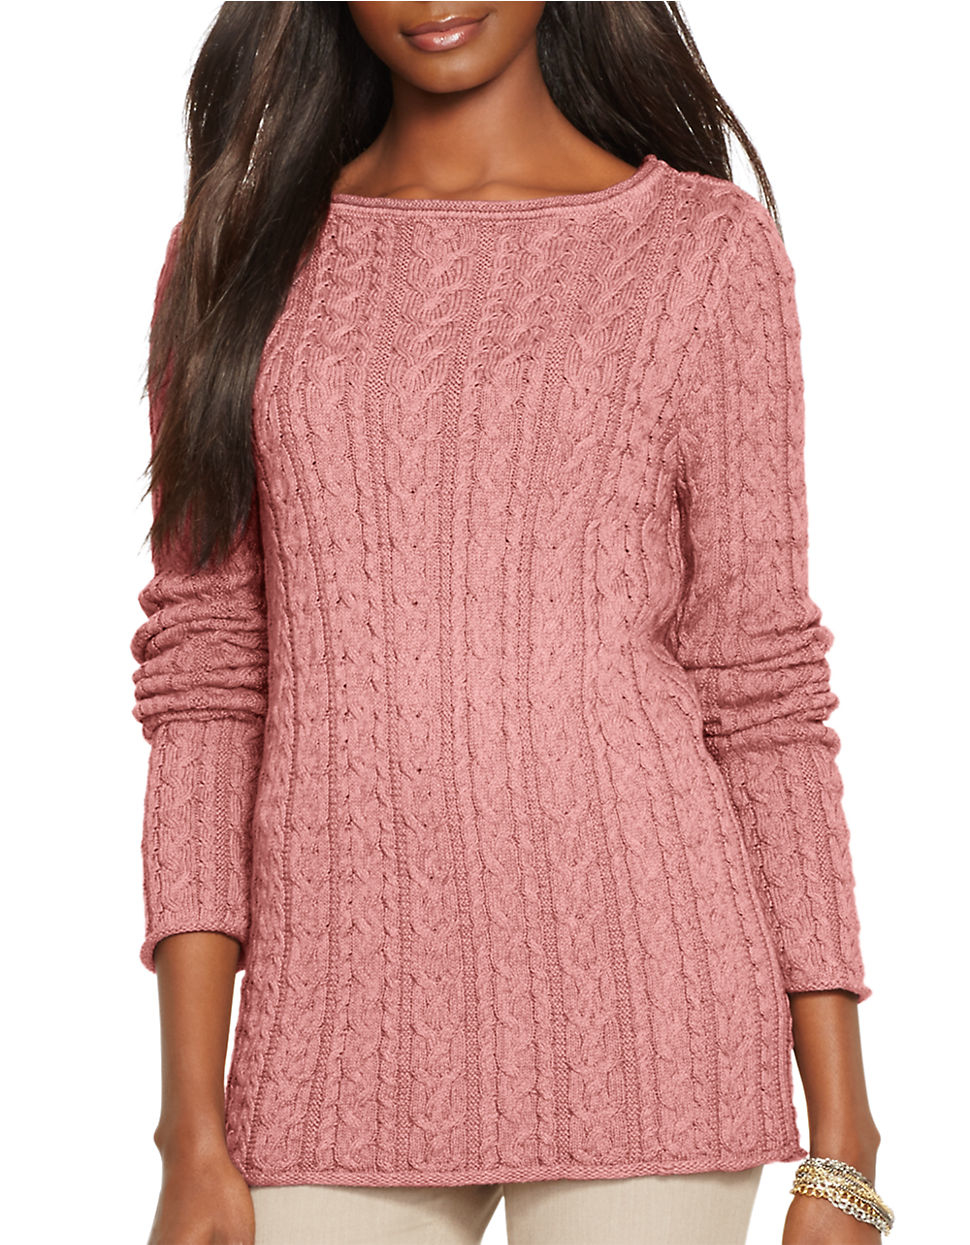 Lauren by Ralph Lauren Petite Cable-knit Cotton Sweater in Pink - Lyst